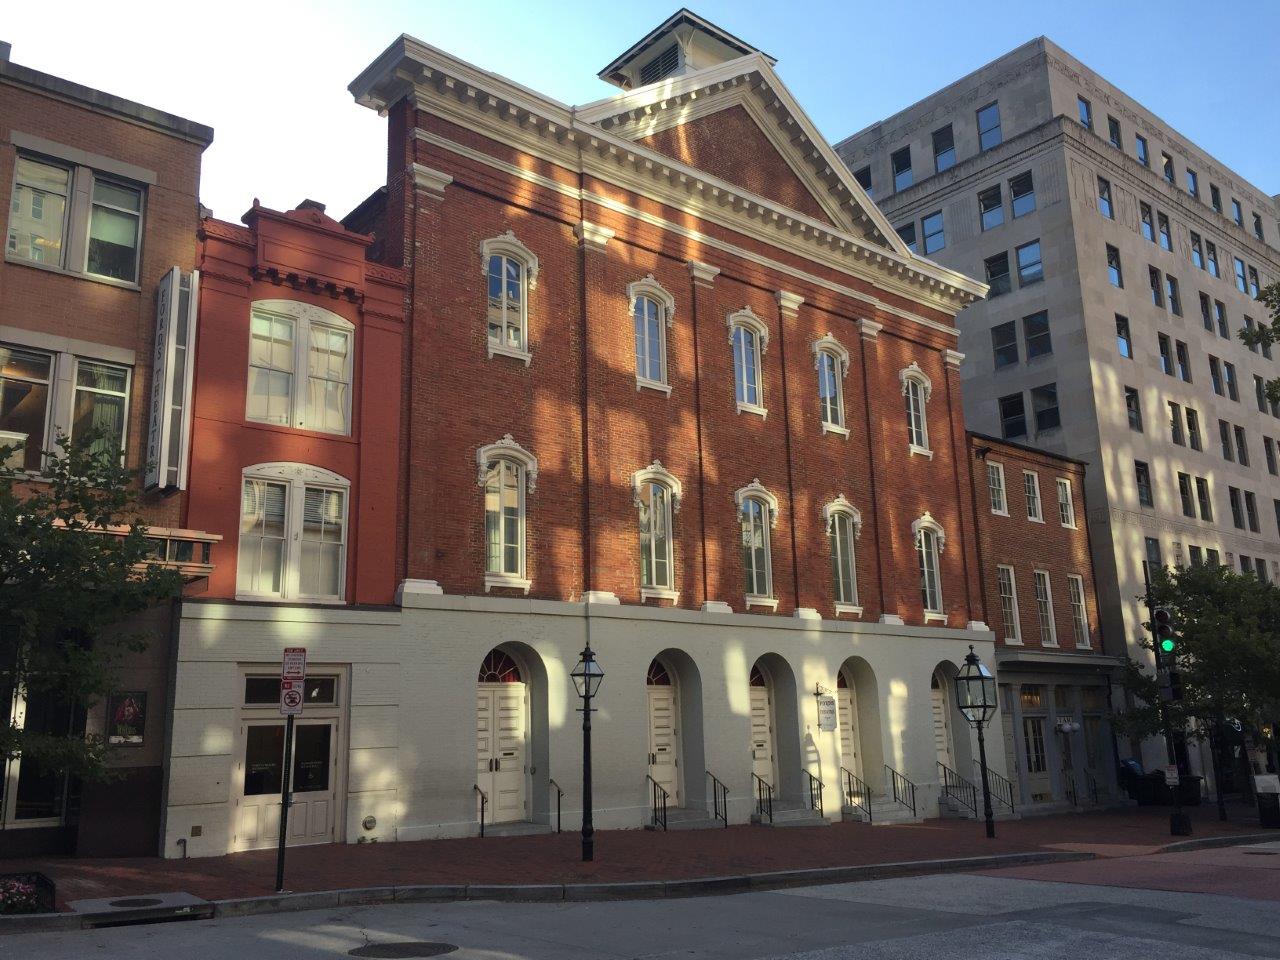 Abraham Lincoln assassination site at Ford's Theatre Washington